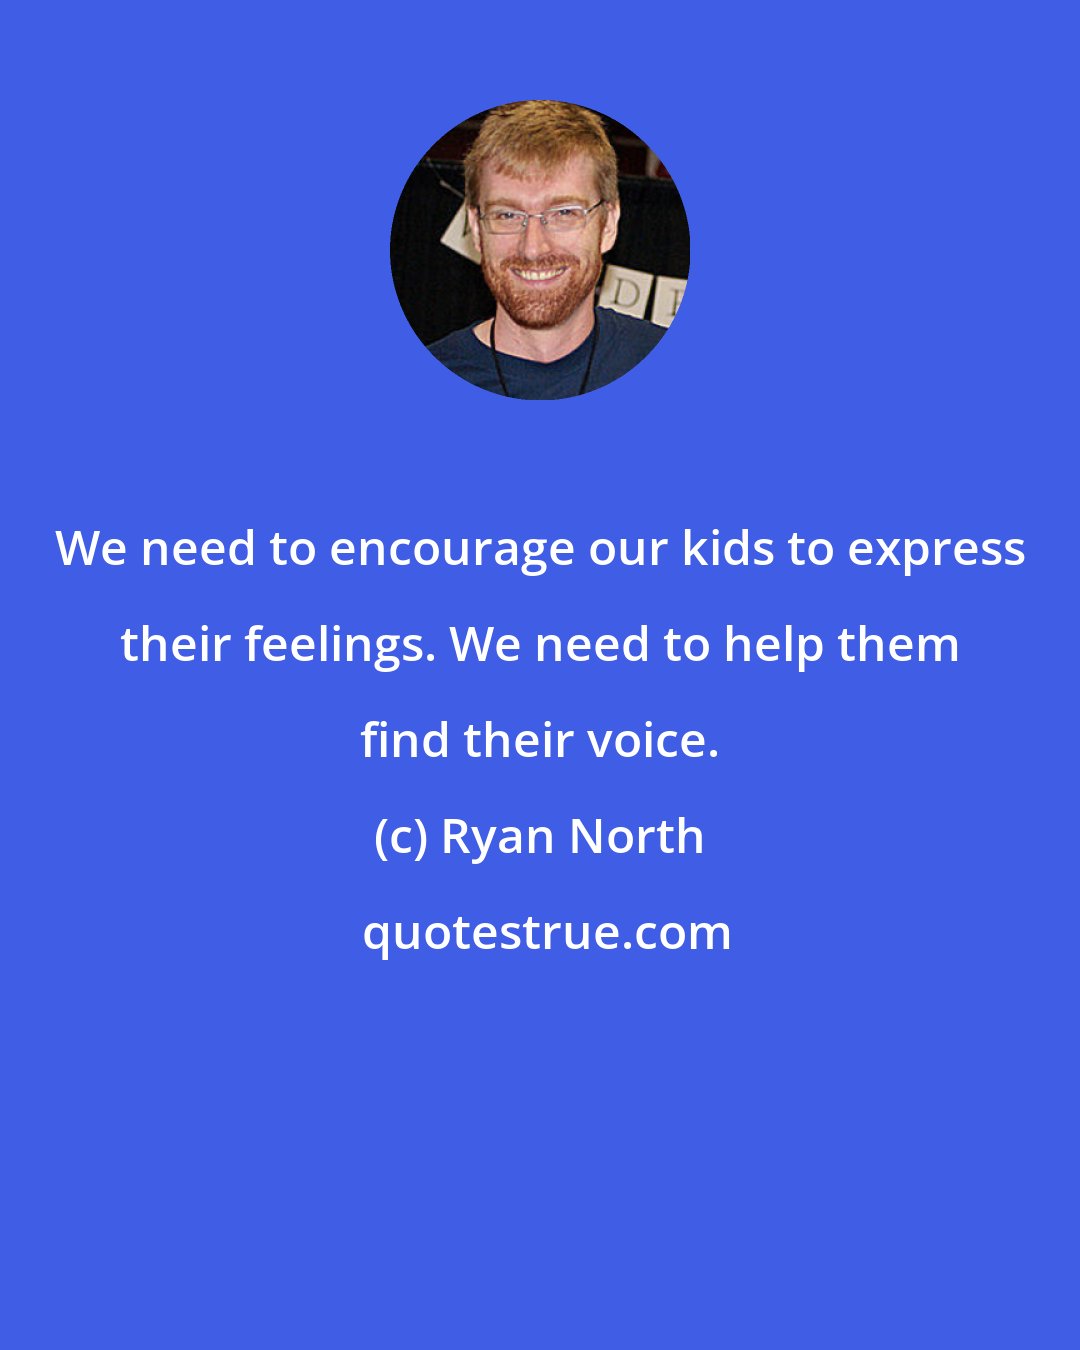 Ryan North: We need to encourage our kids to express their feelings. We need to help them find their voice.